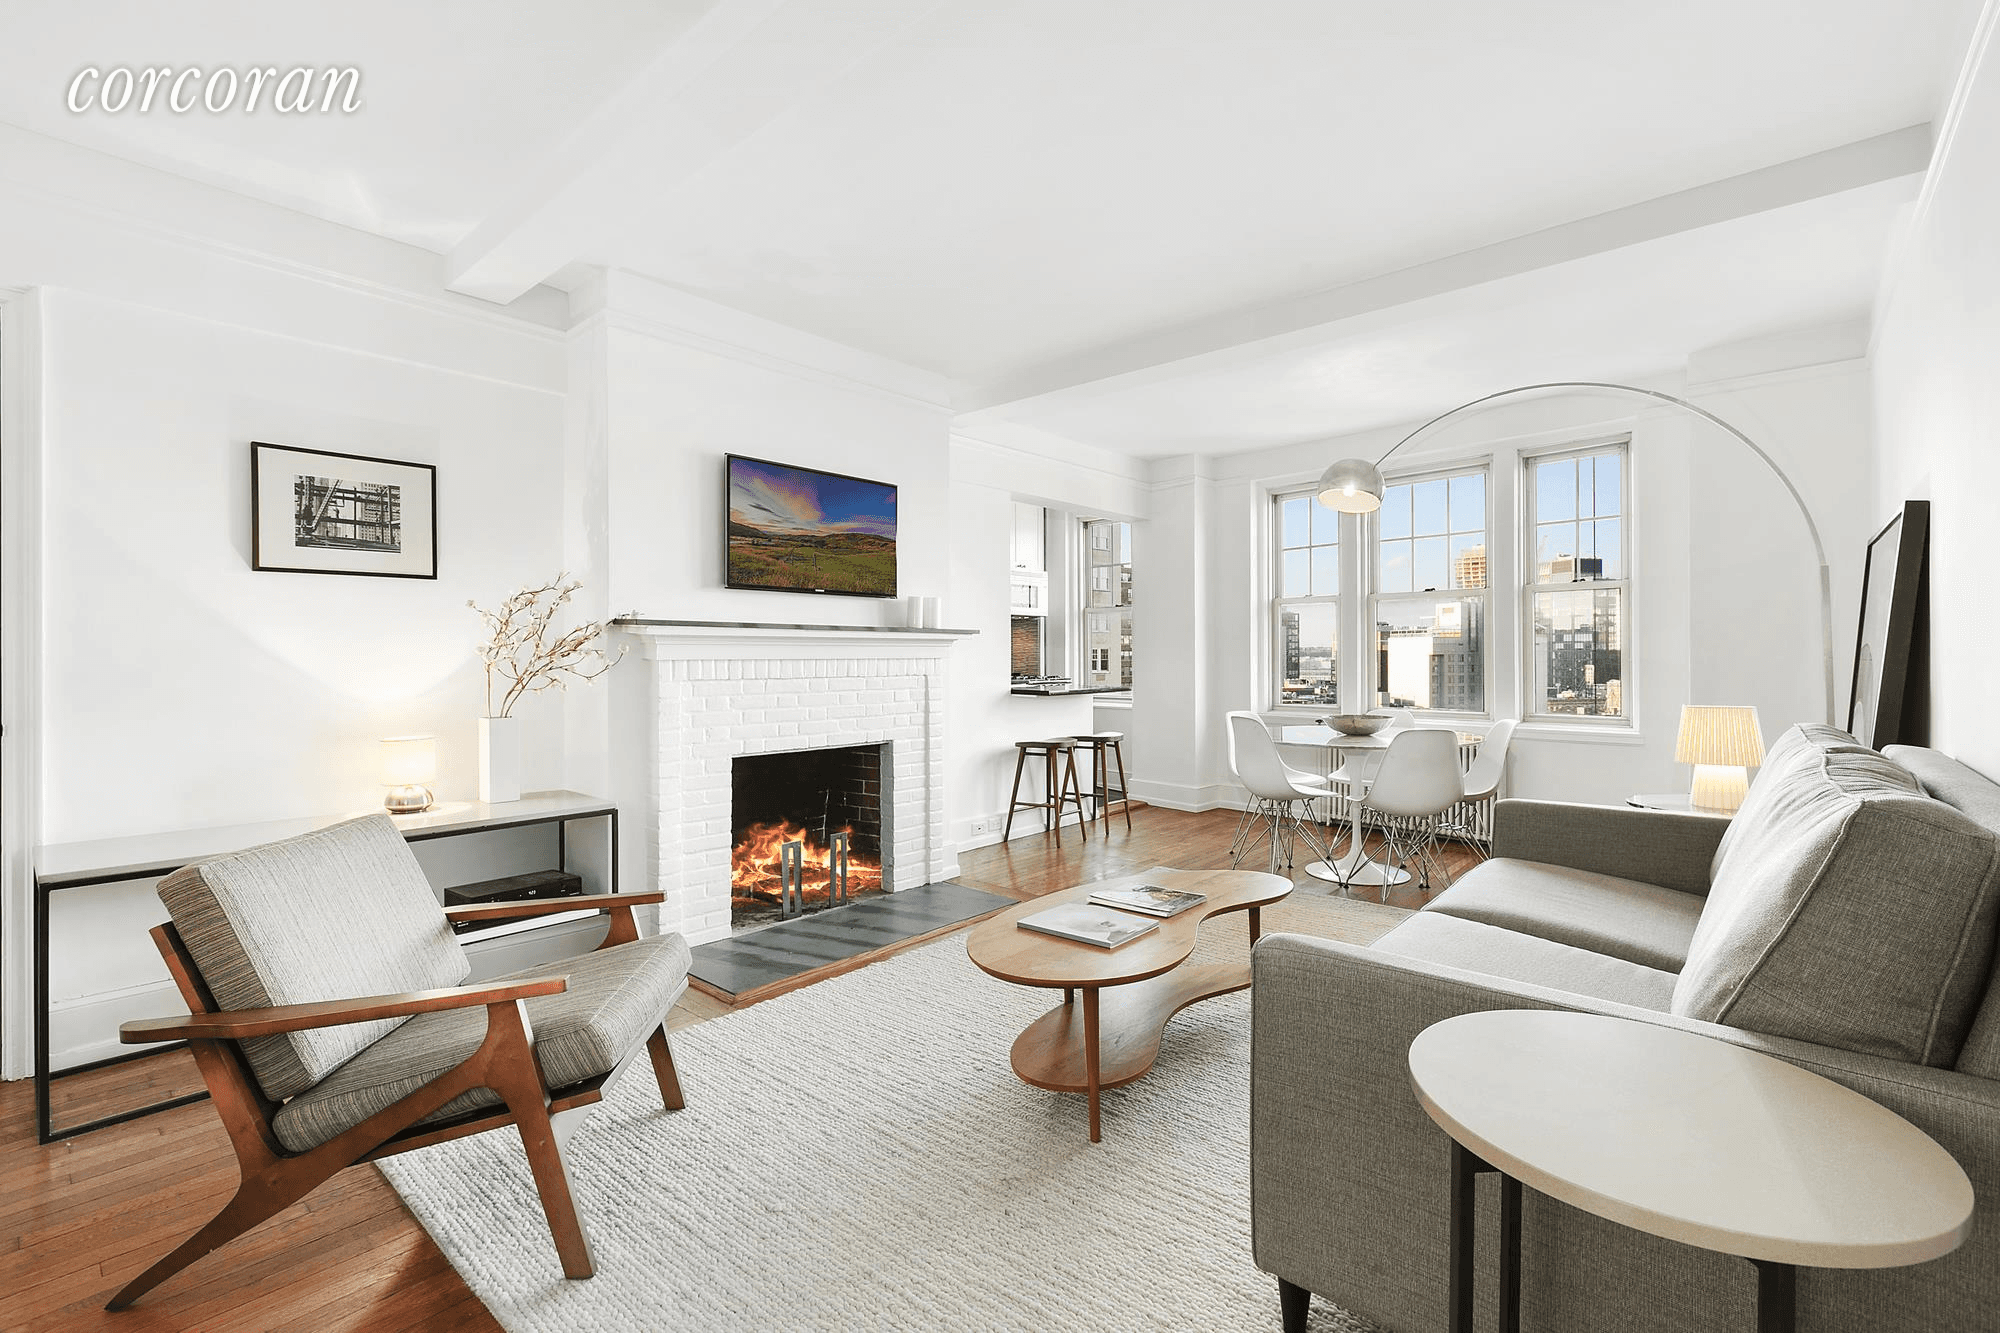 Property sold with tenant in place, please enquire for more details Rarely available, this sun drenched West Village condominium offers stunning open views, including the Empire State Building.